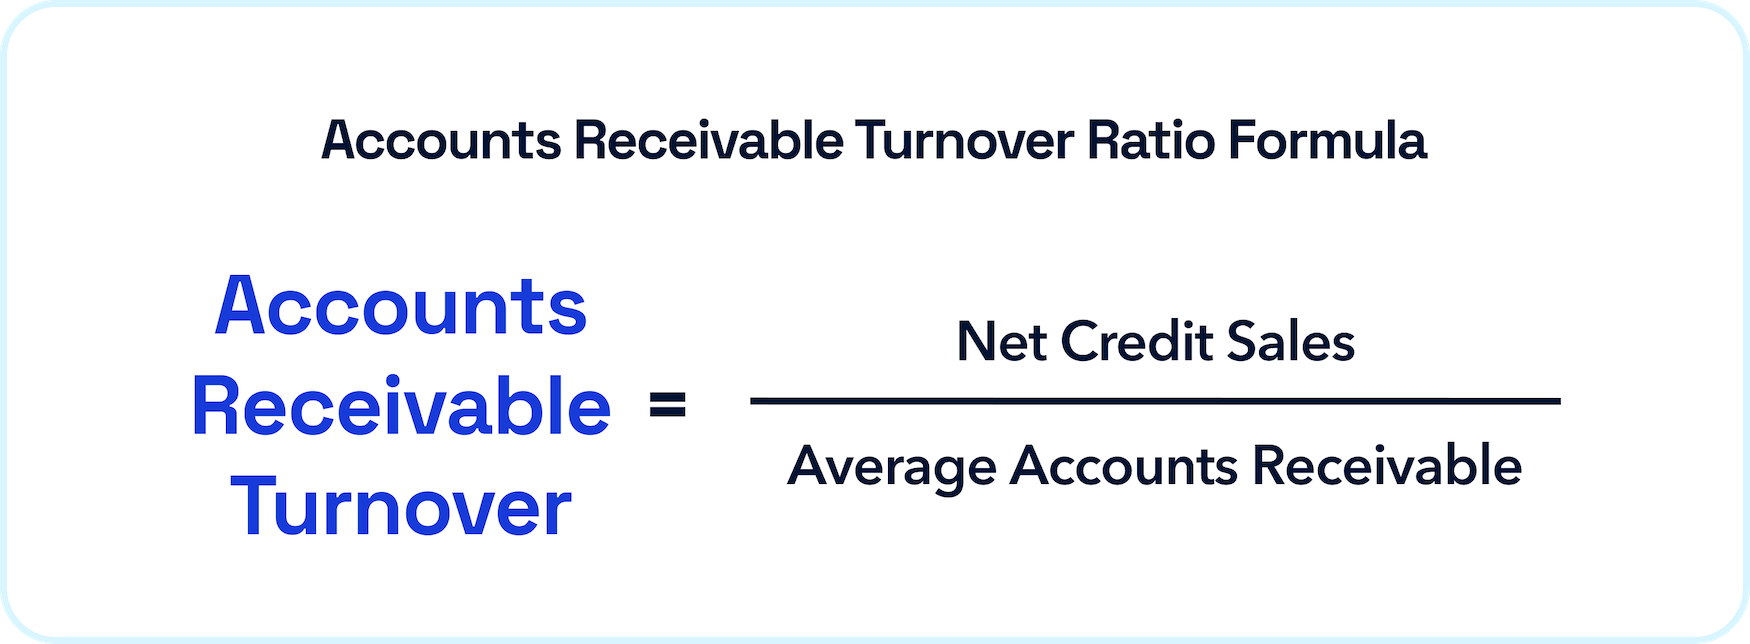 AR turnover = net credit sales / average accounts receivable